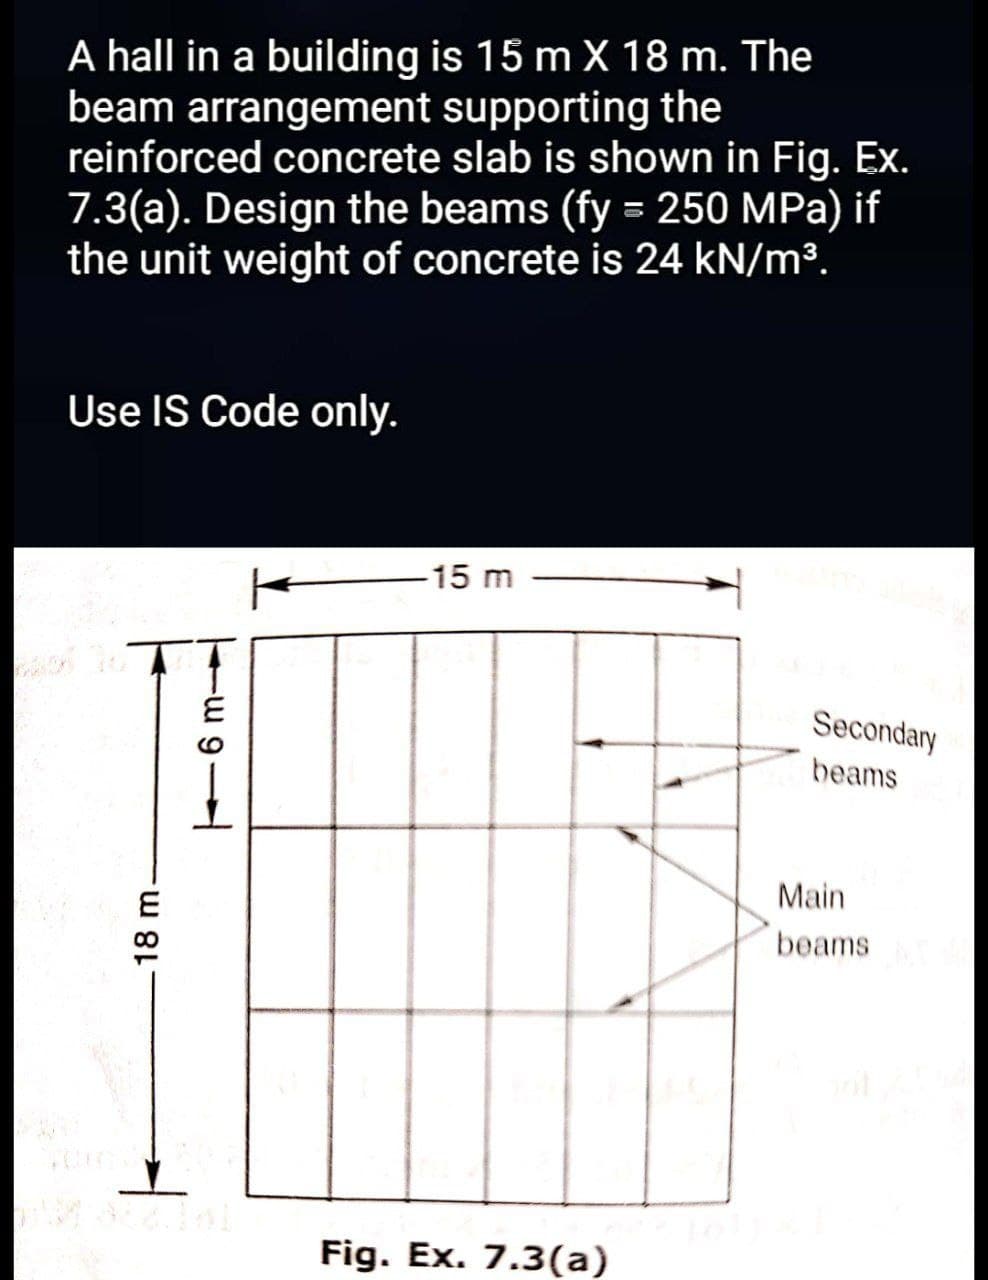 A hall in a building is 15 m X 18 m. The
beam arrangement supporting the
reinforced concrete slab is shown in Fig. Ex.
7.3(a). Design the beams (fy = 250 MPa) if
the unit weight of concrete is 24 kN/m³.
Use IS Code only.
-15 m
Secondary
beams
Main
beams
Fig. Ex. 7.3(a)
